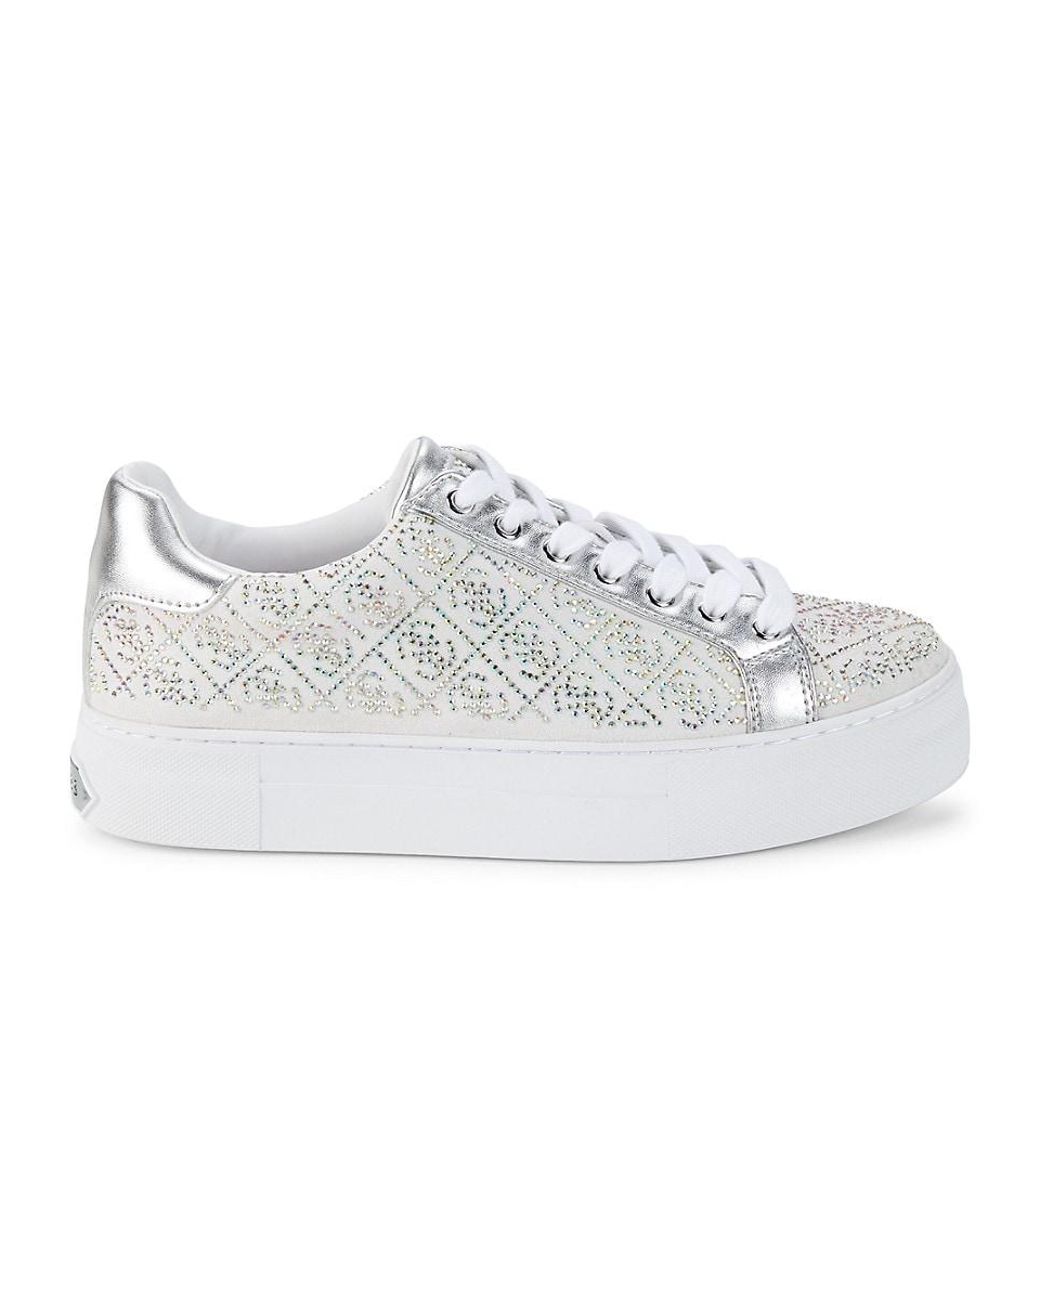 Guess Gelsen 2 Embellished Platform Sneakers in White | Lyst Canada